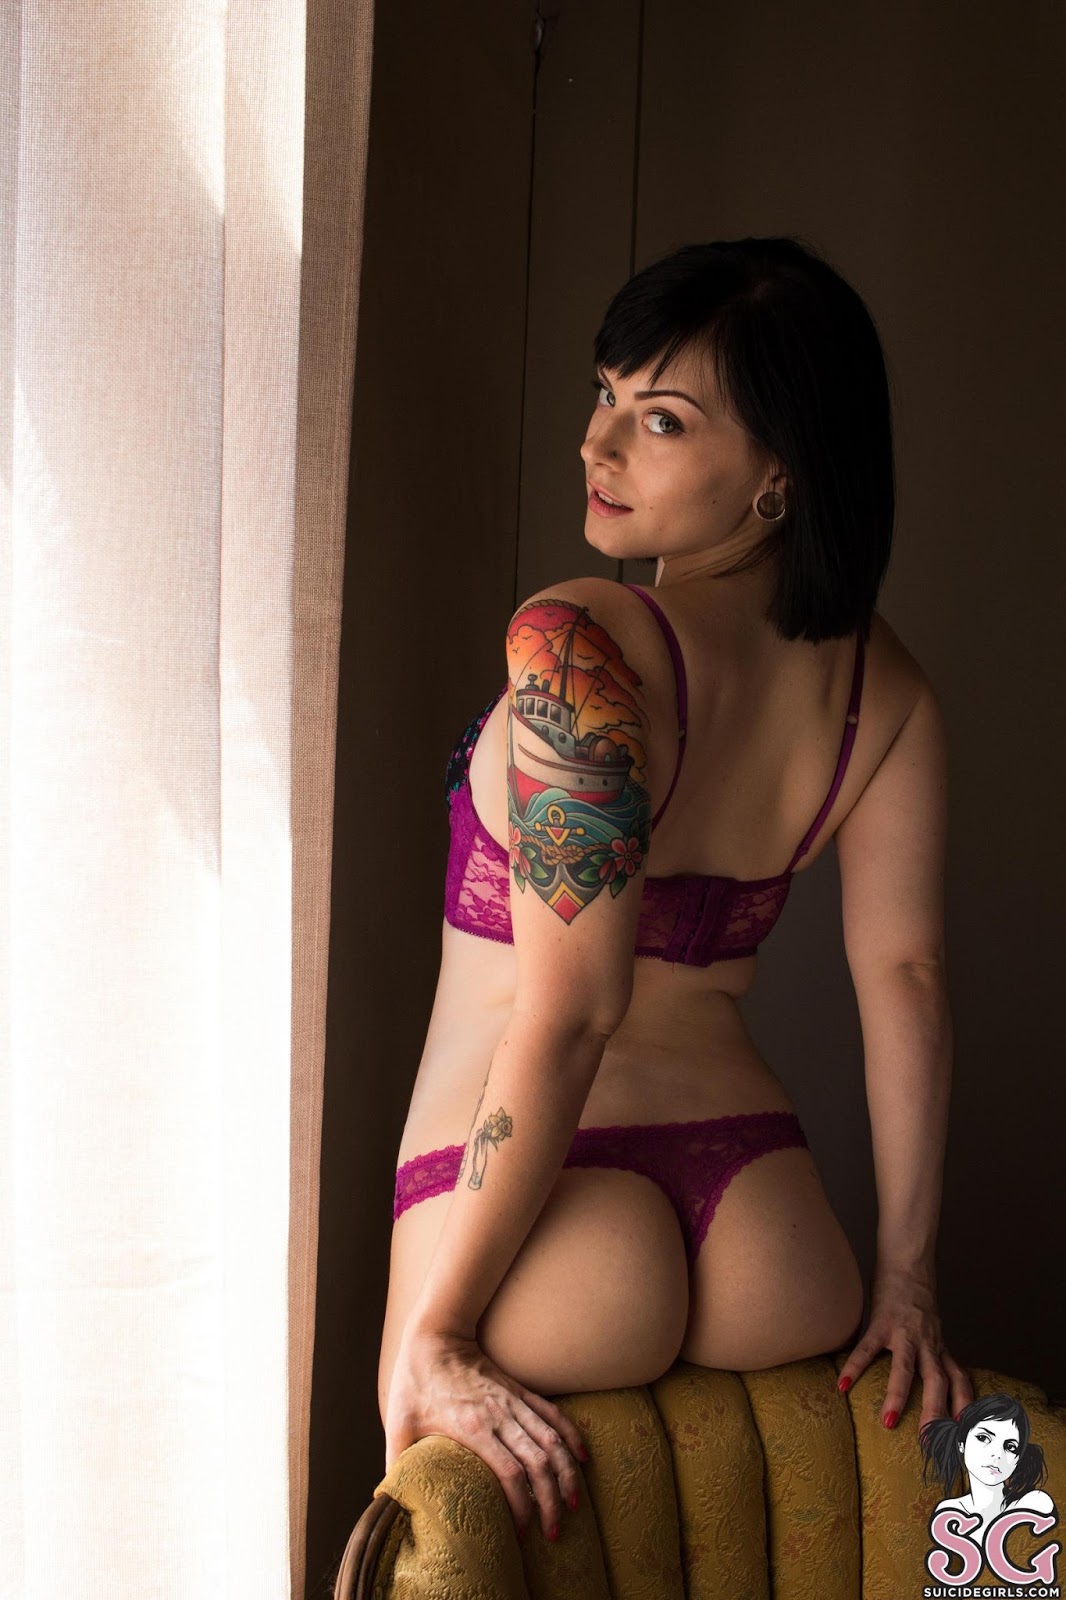 Ceres suicide naked